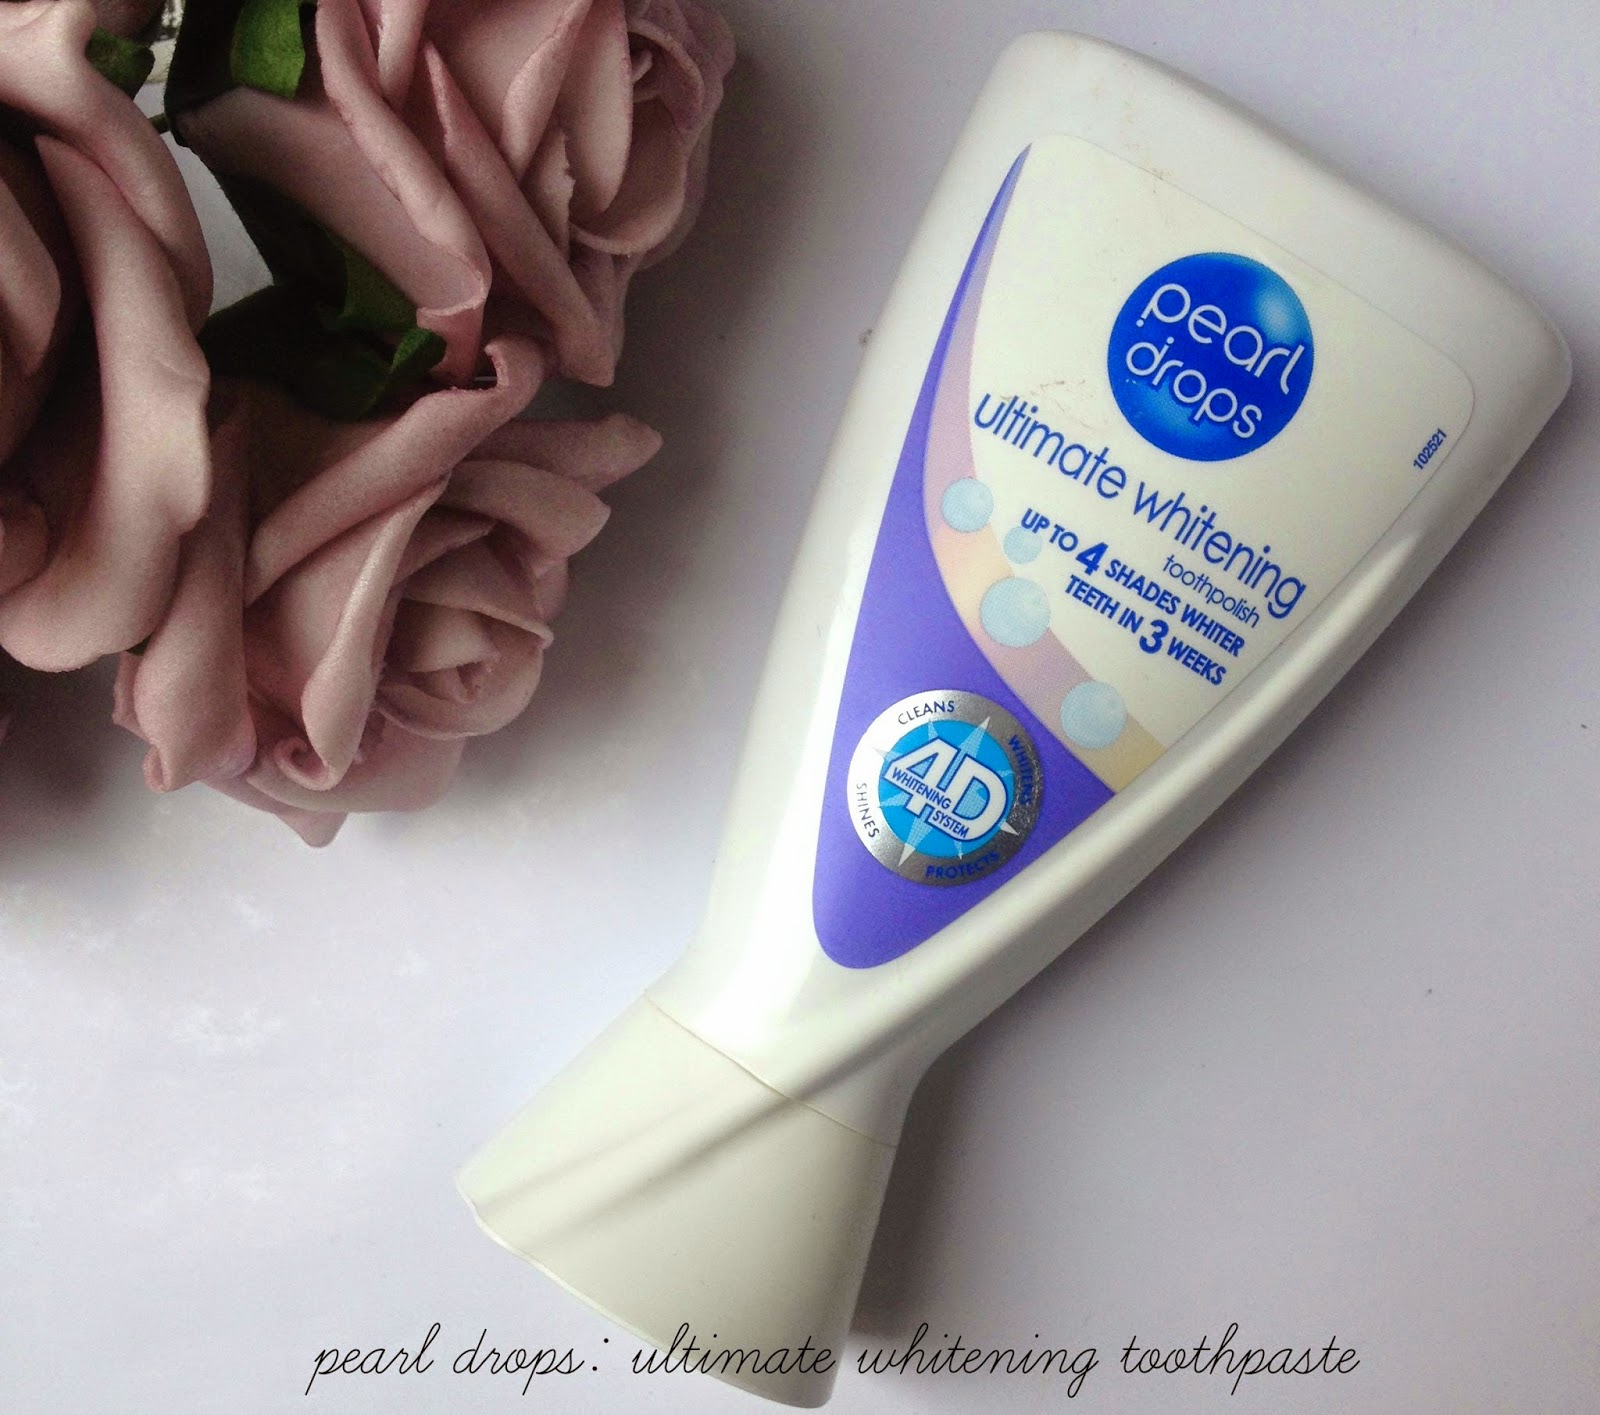 pearl drops: ultimate whitening toothpaste @ http://emandhanxo.blogspot.co.uk